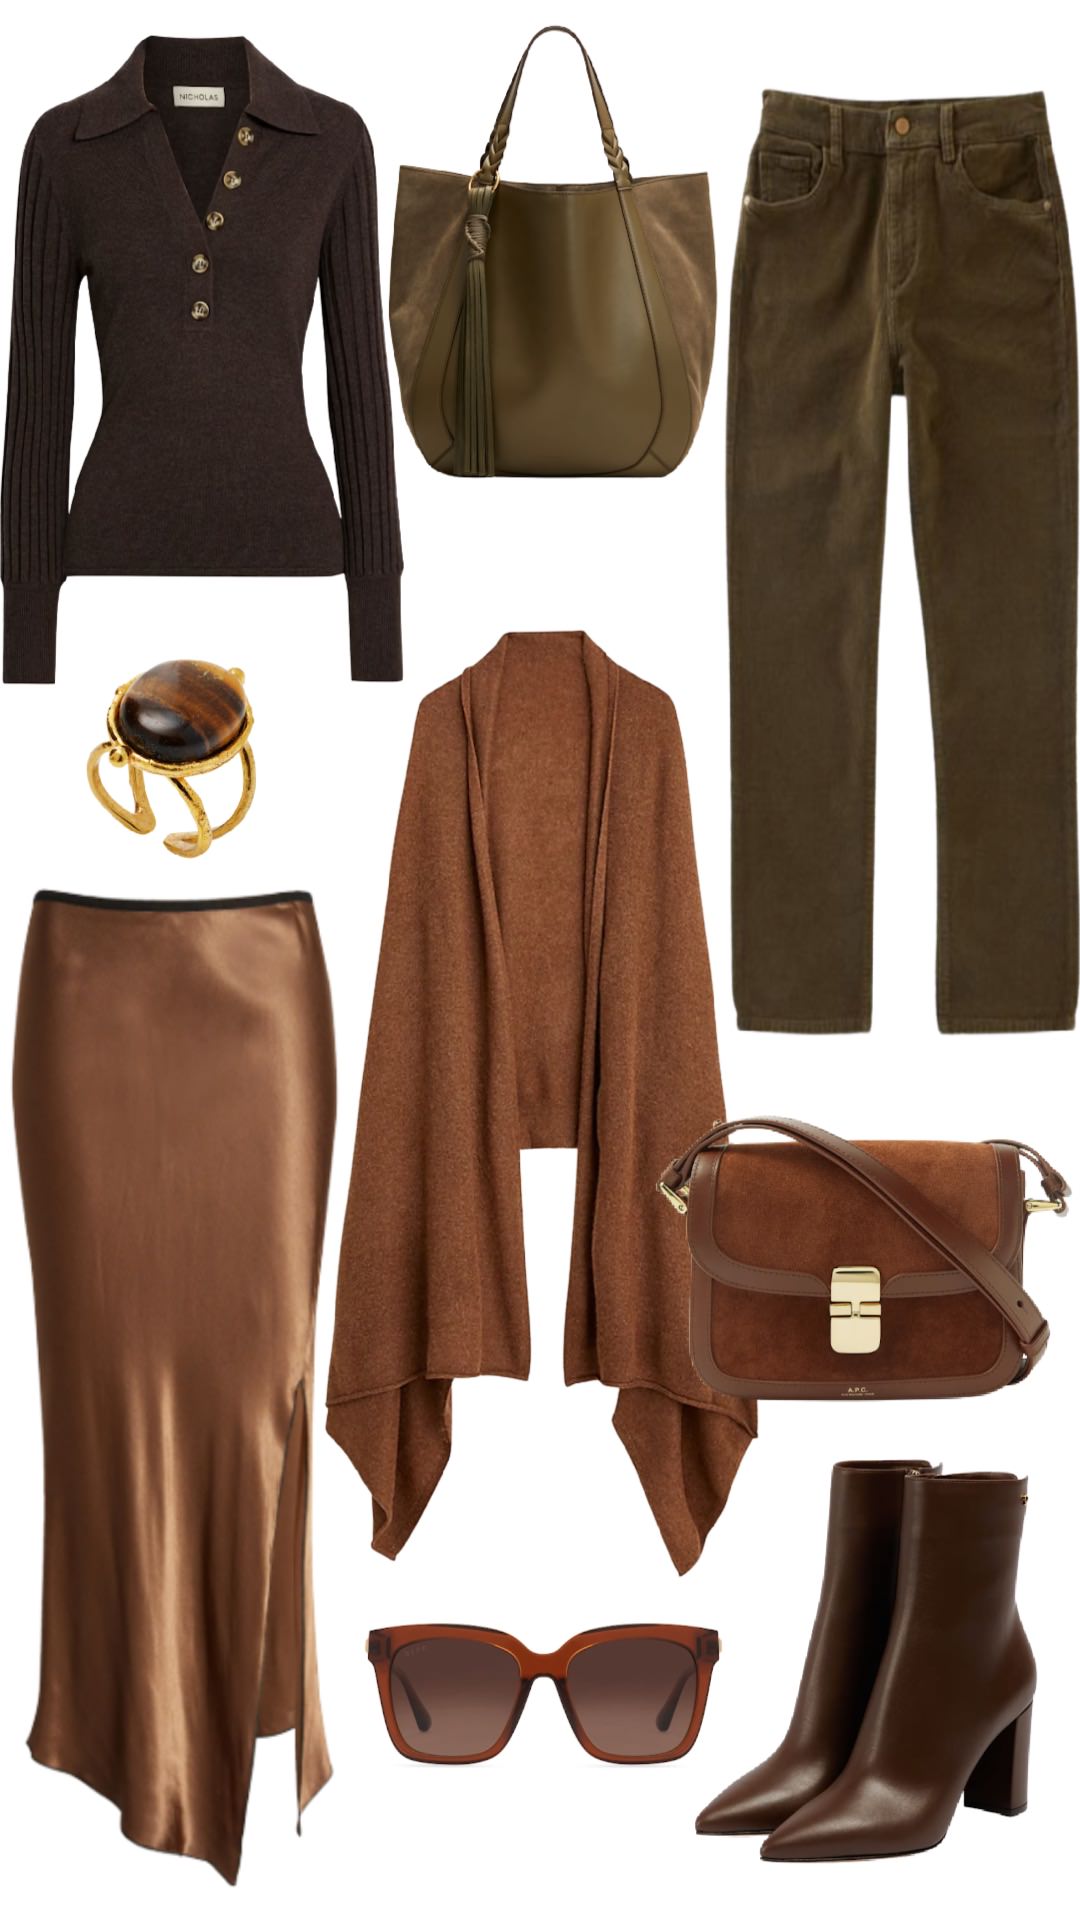 Rich Earth Tone Pieces for Fall